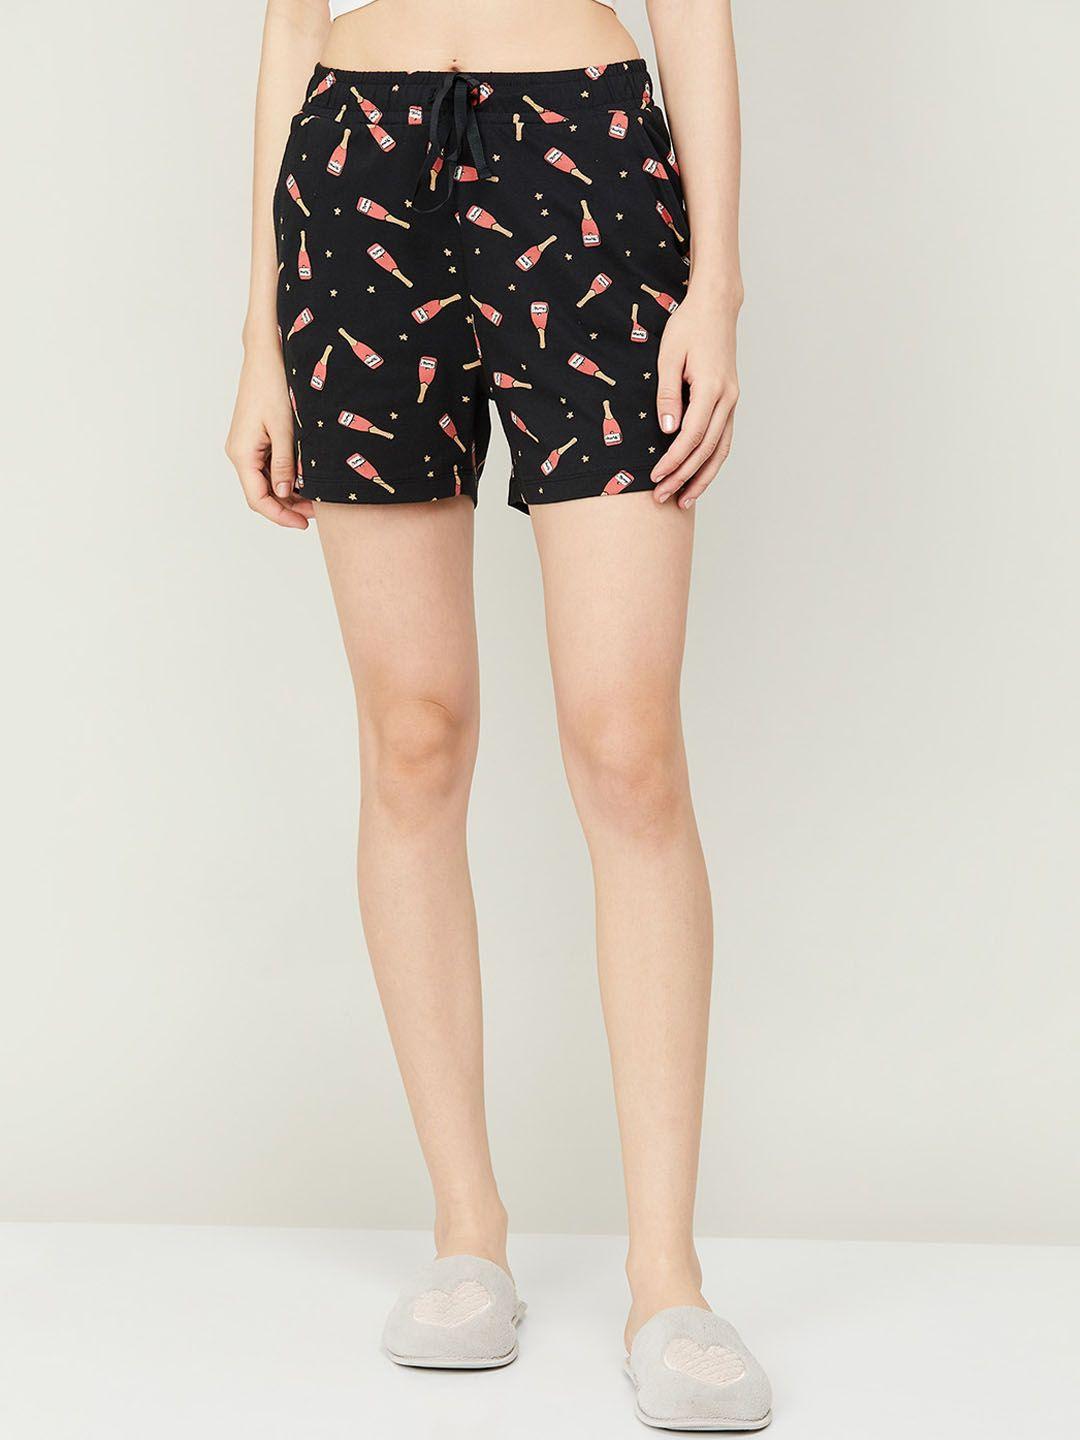 ginger by lifestyle women conversational printed mid-rise cotton shorts